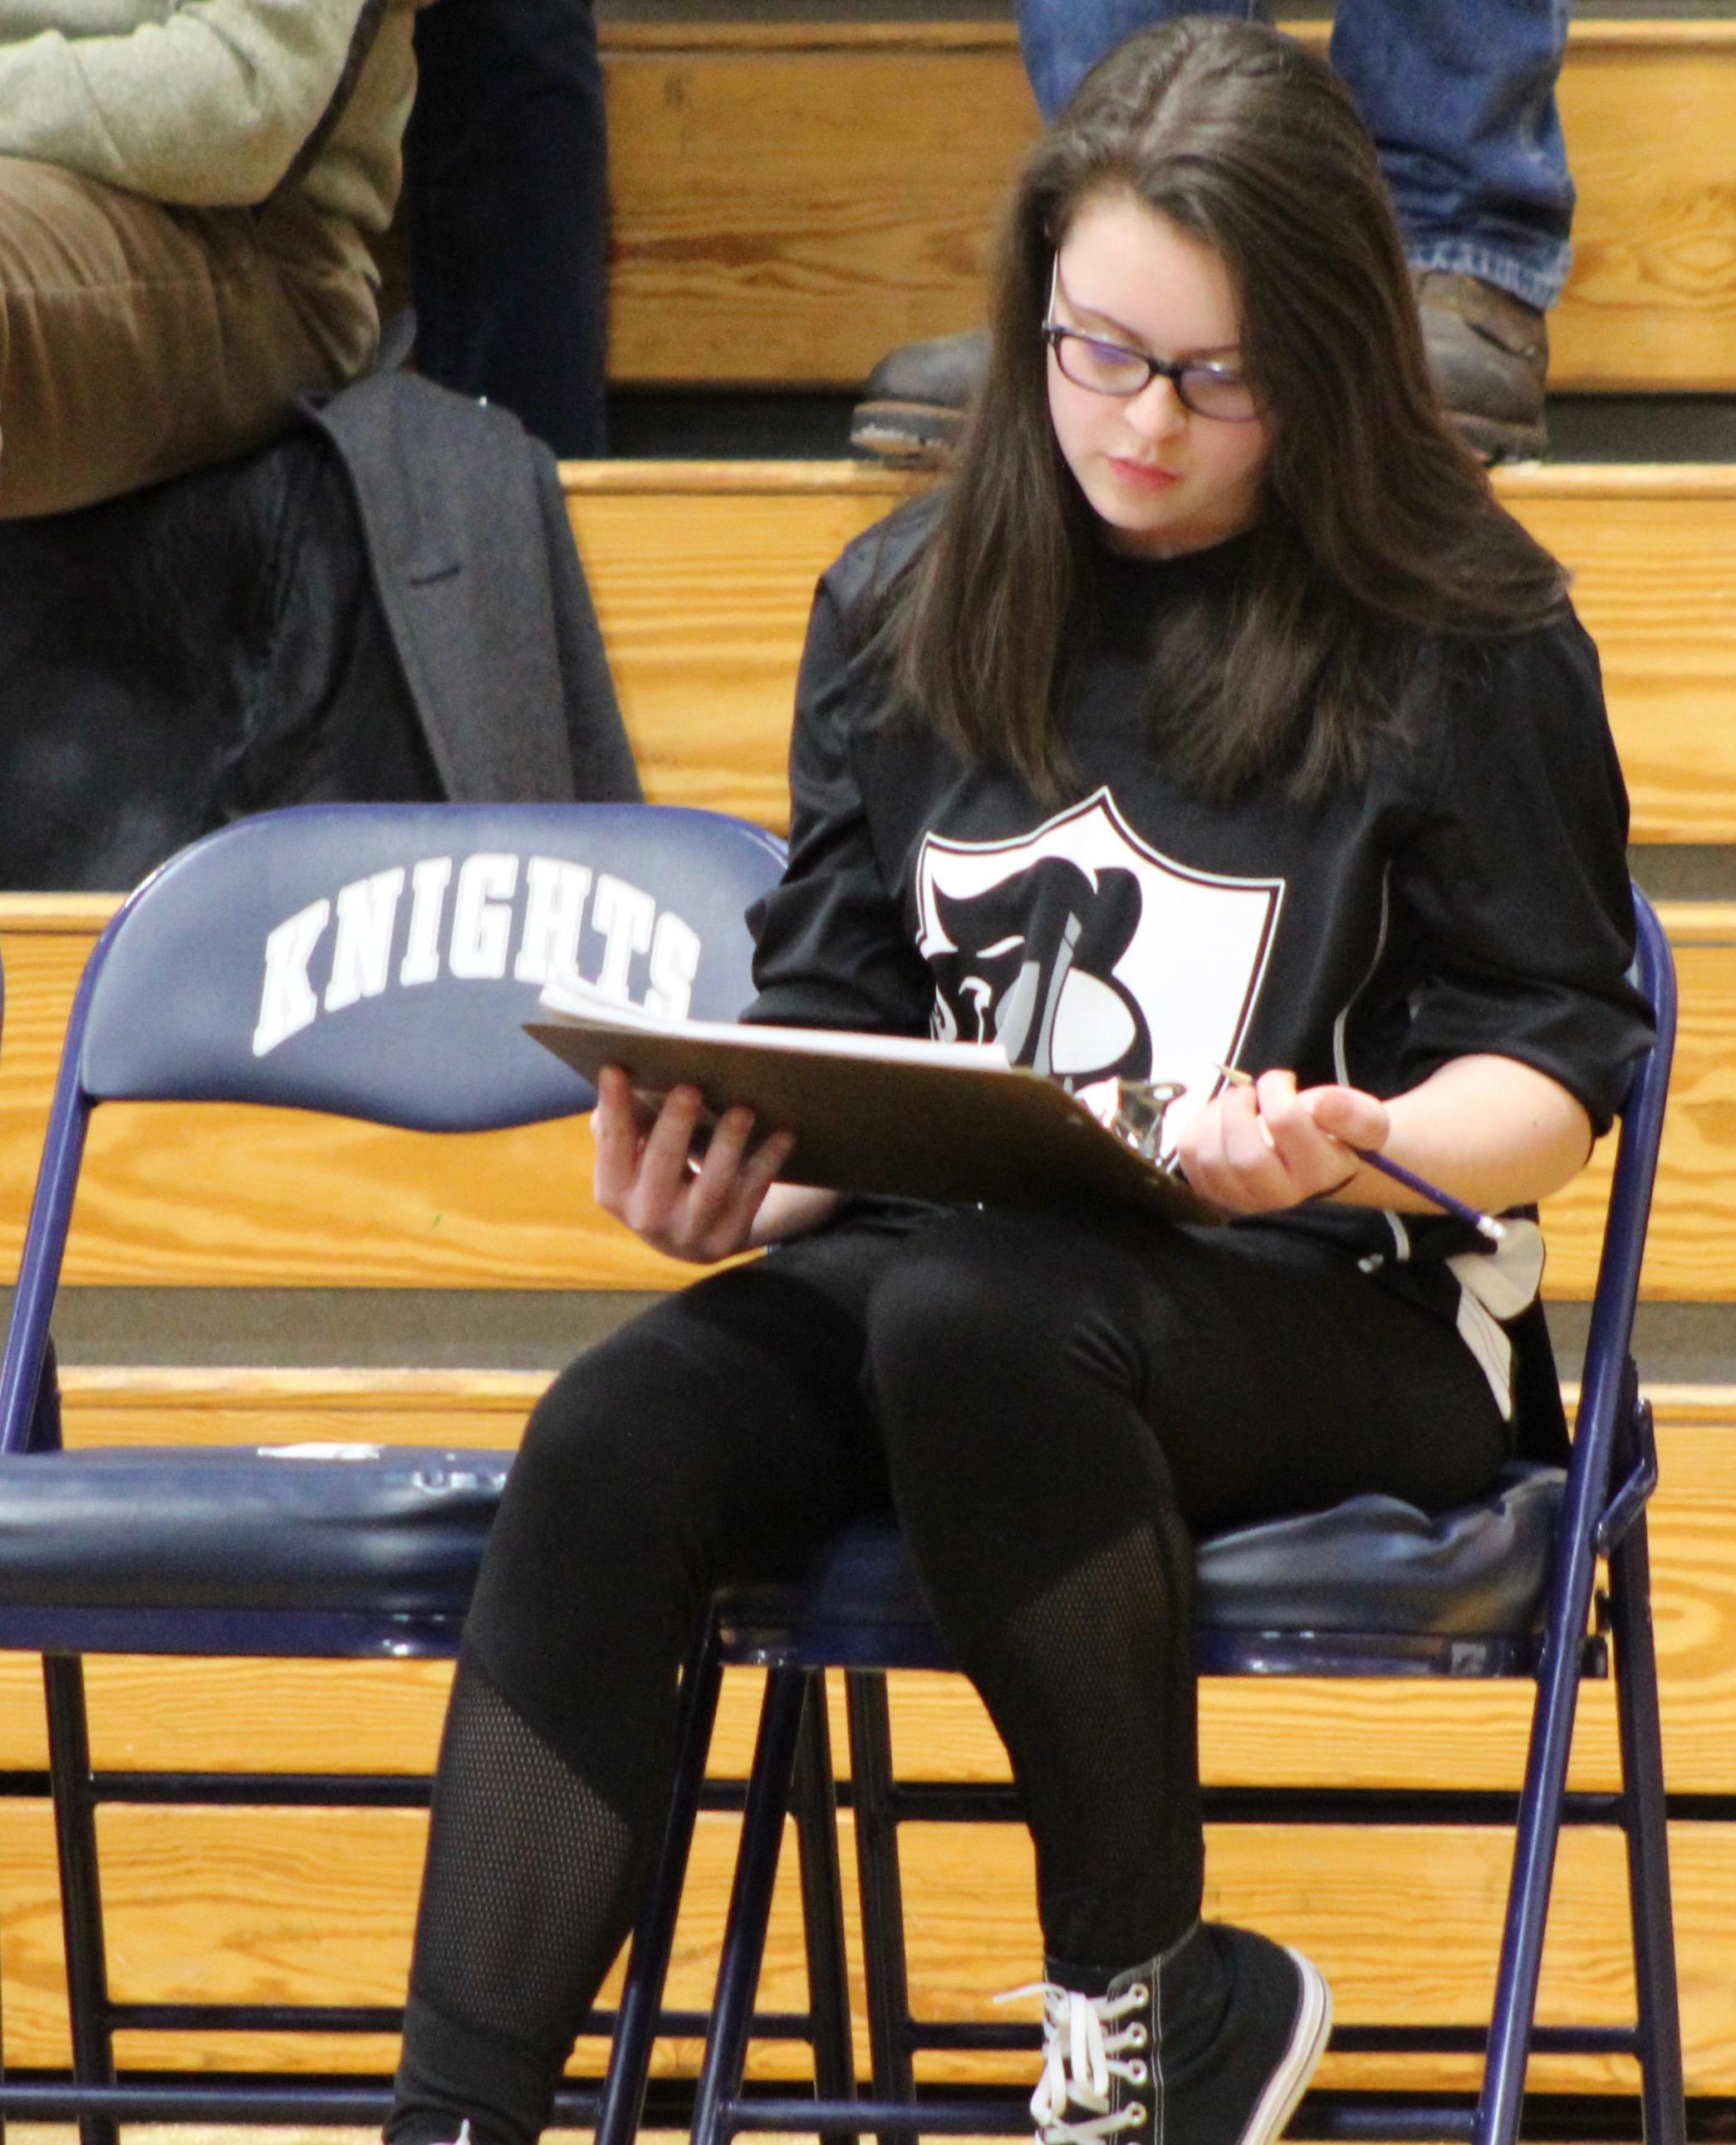 Photo of student at a basketball game